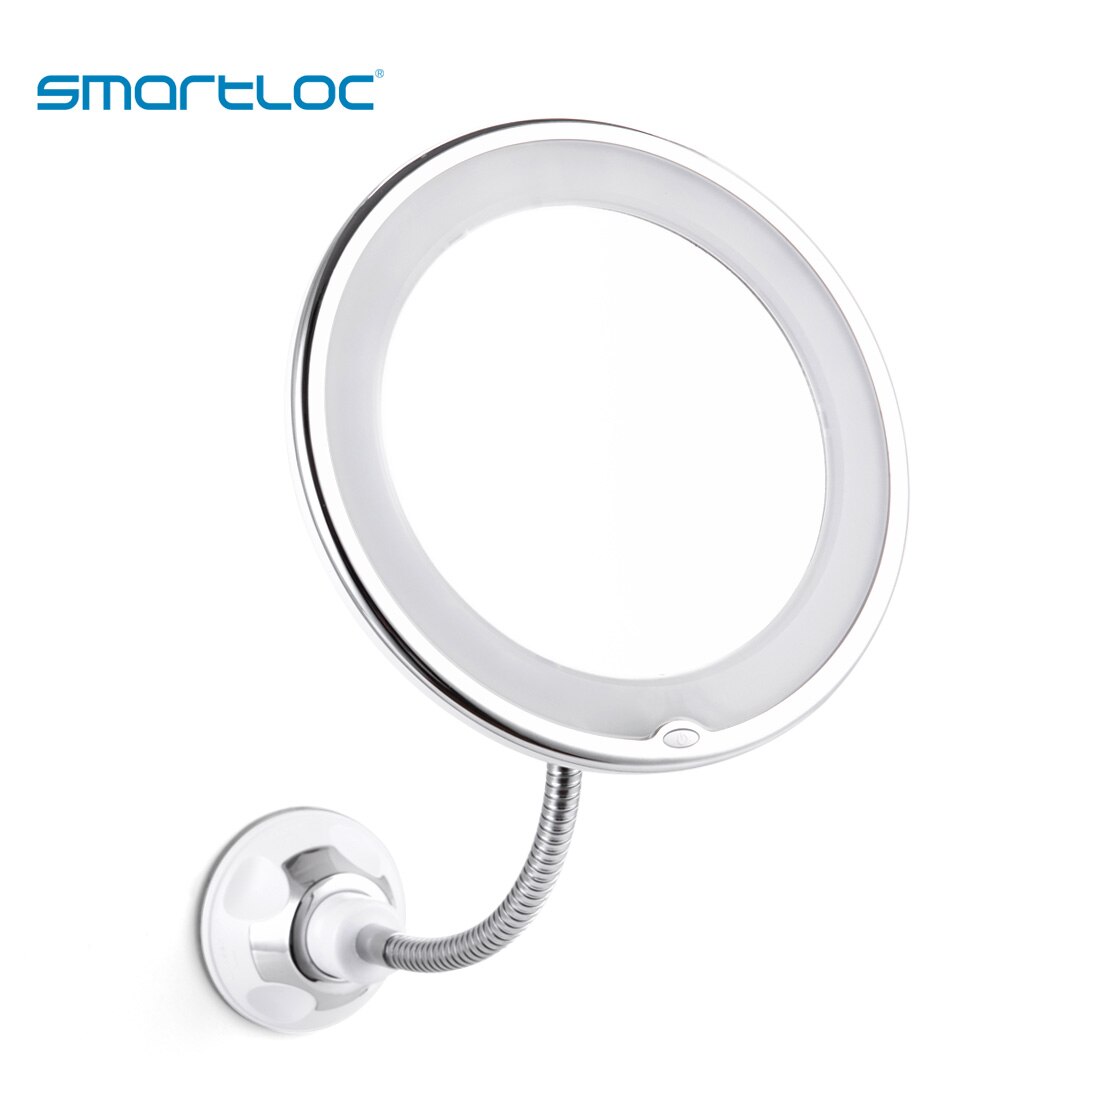 smartloc Extendable LED 10X Magnifying Bathroom Wall Mounted Mirror Mural Light Vanity Makeup Bathroom Mirror Smart Mirror: Default Title